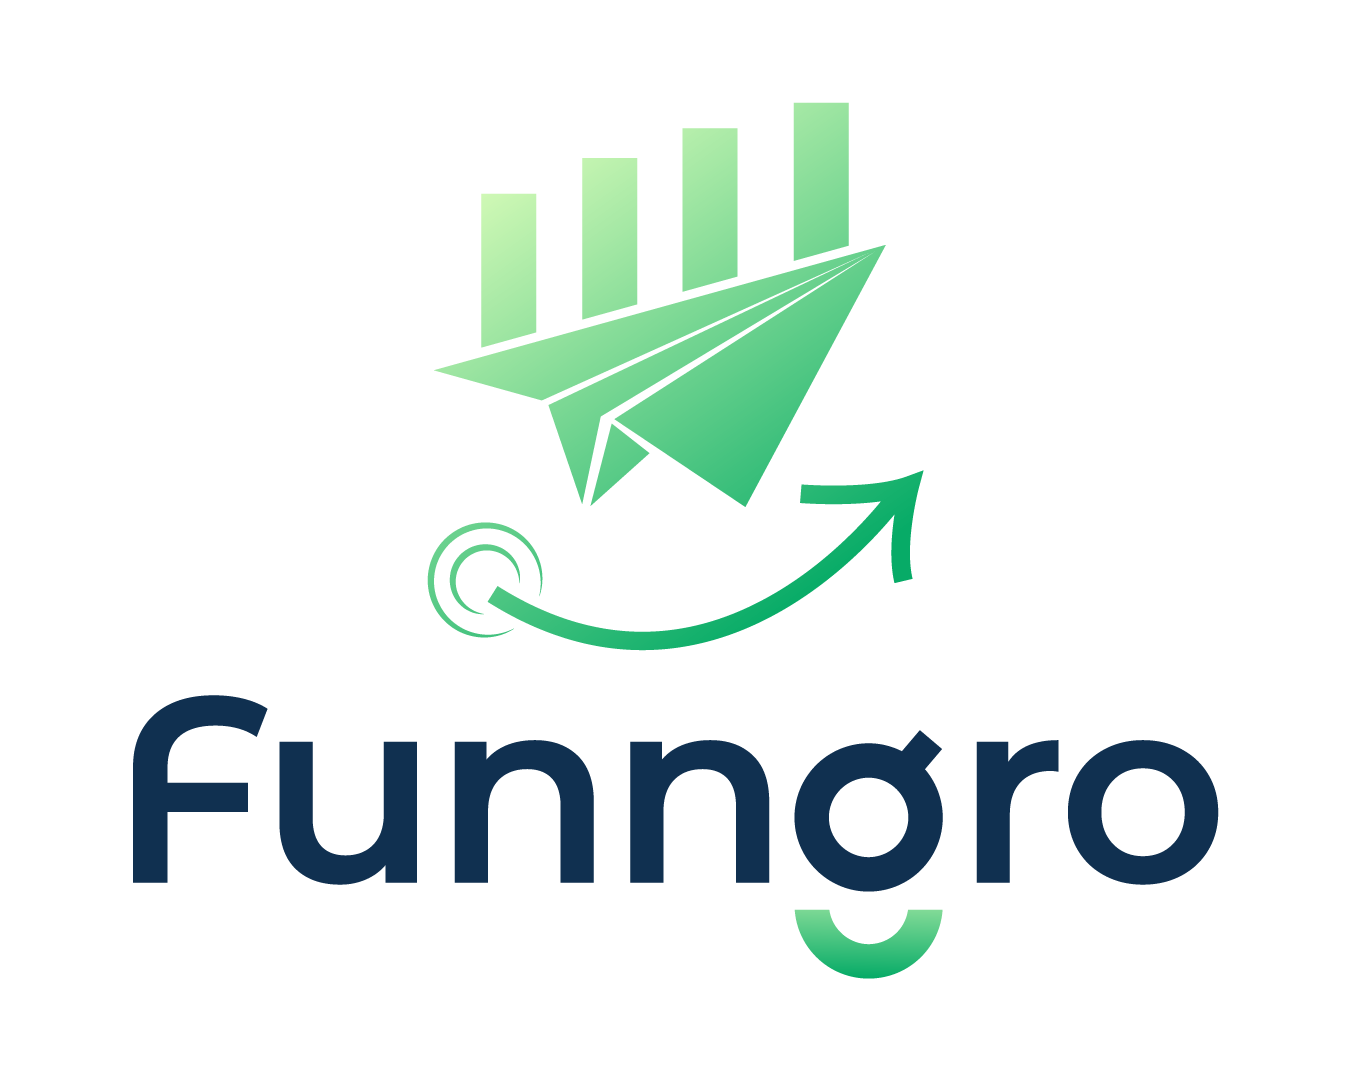 Teens mean business! Funngro offers real-world work experience to teenagers through its revolutionary platform